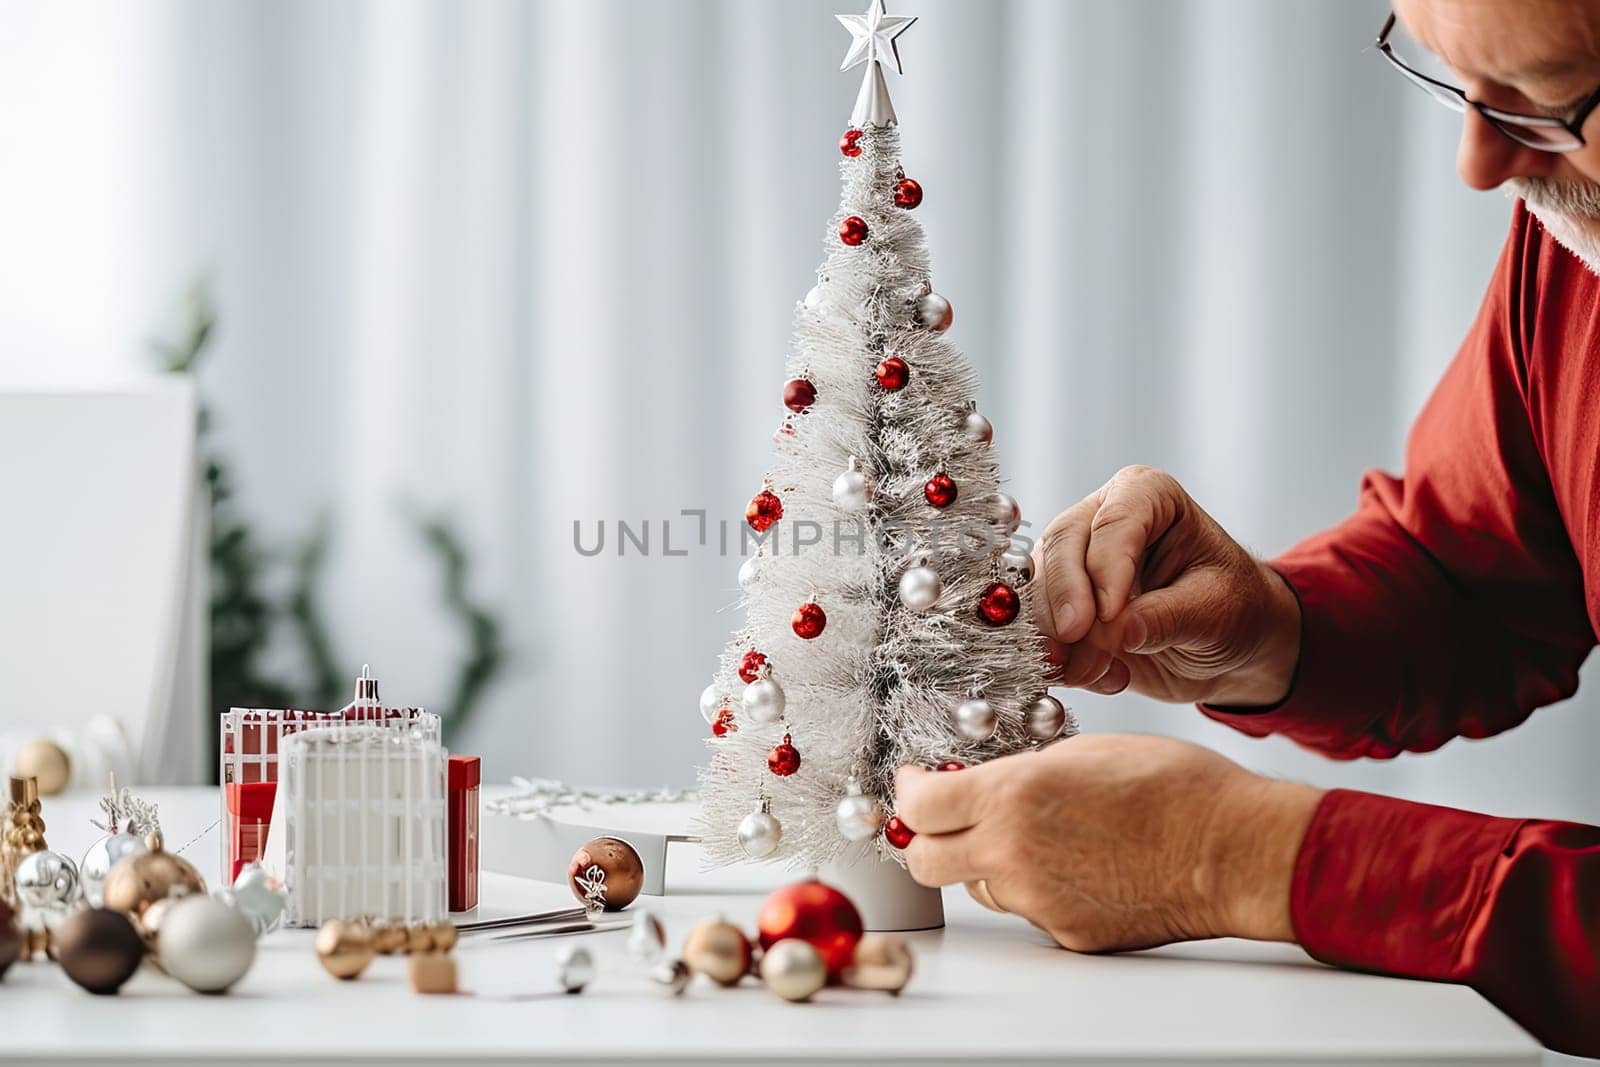 a man decorating a small white christmas tree with red and silver ornaments on it, sitting next to a laptop